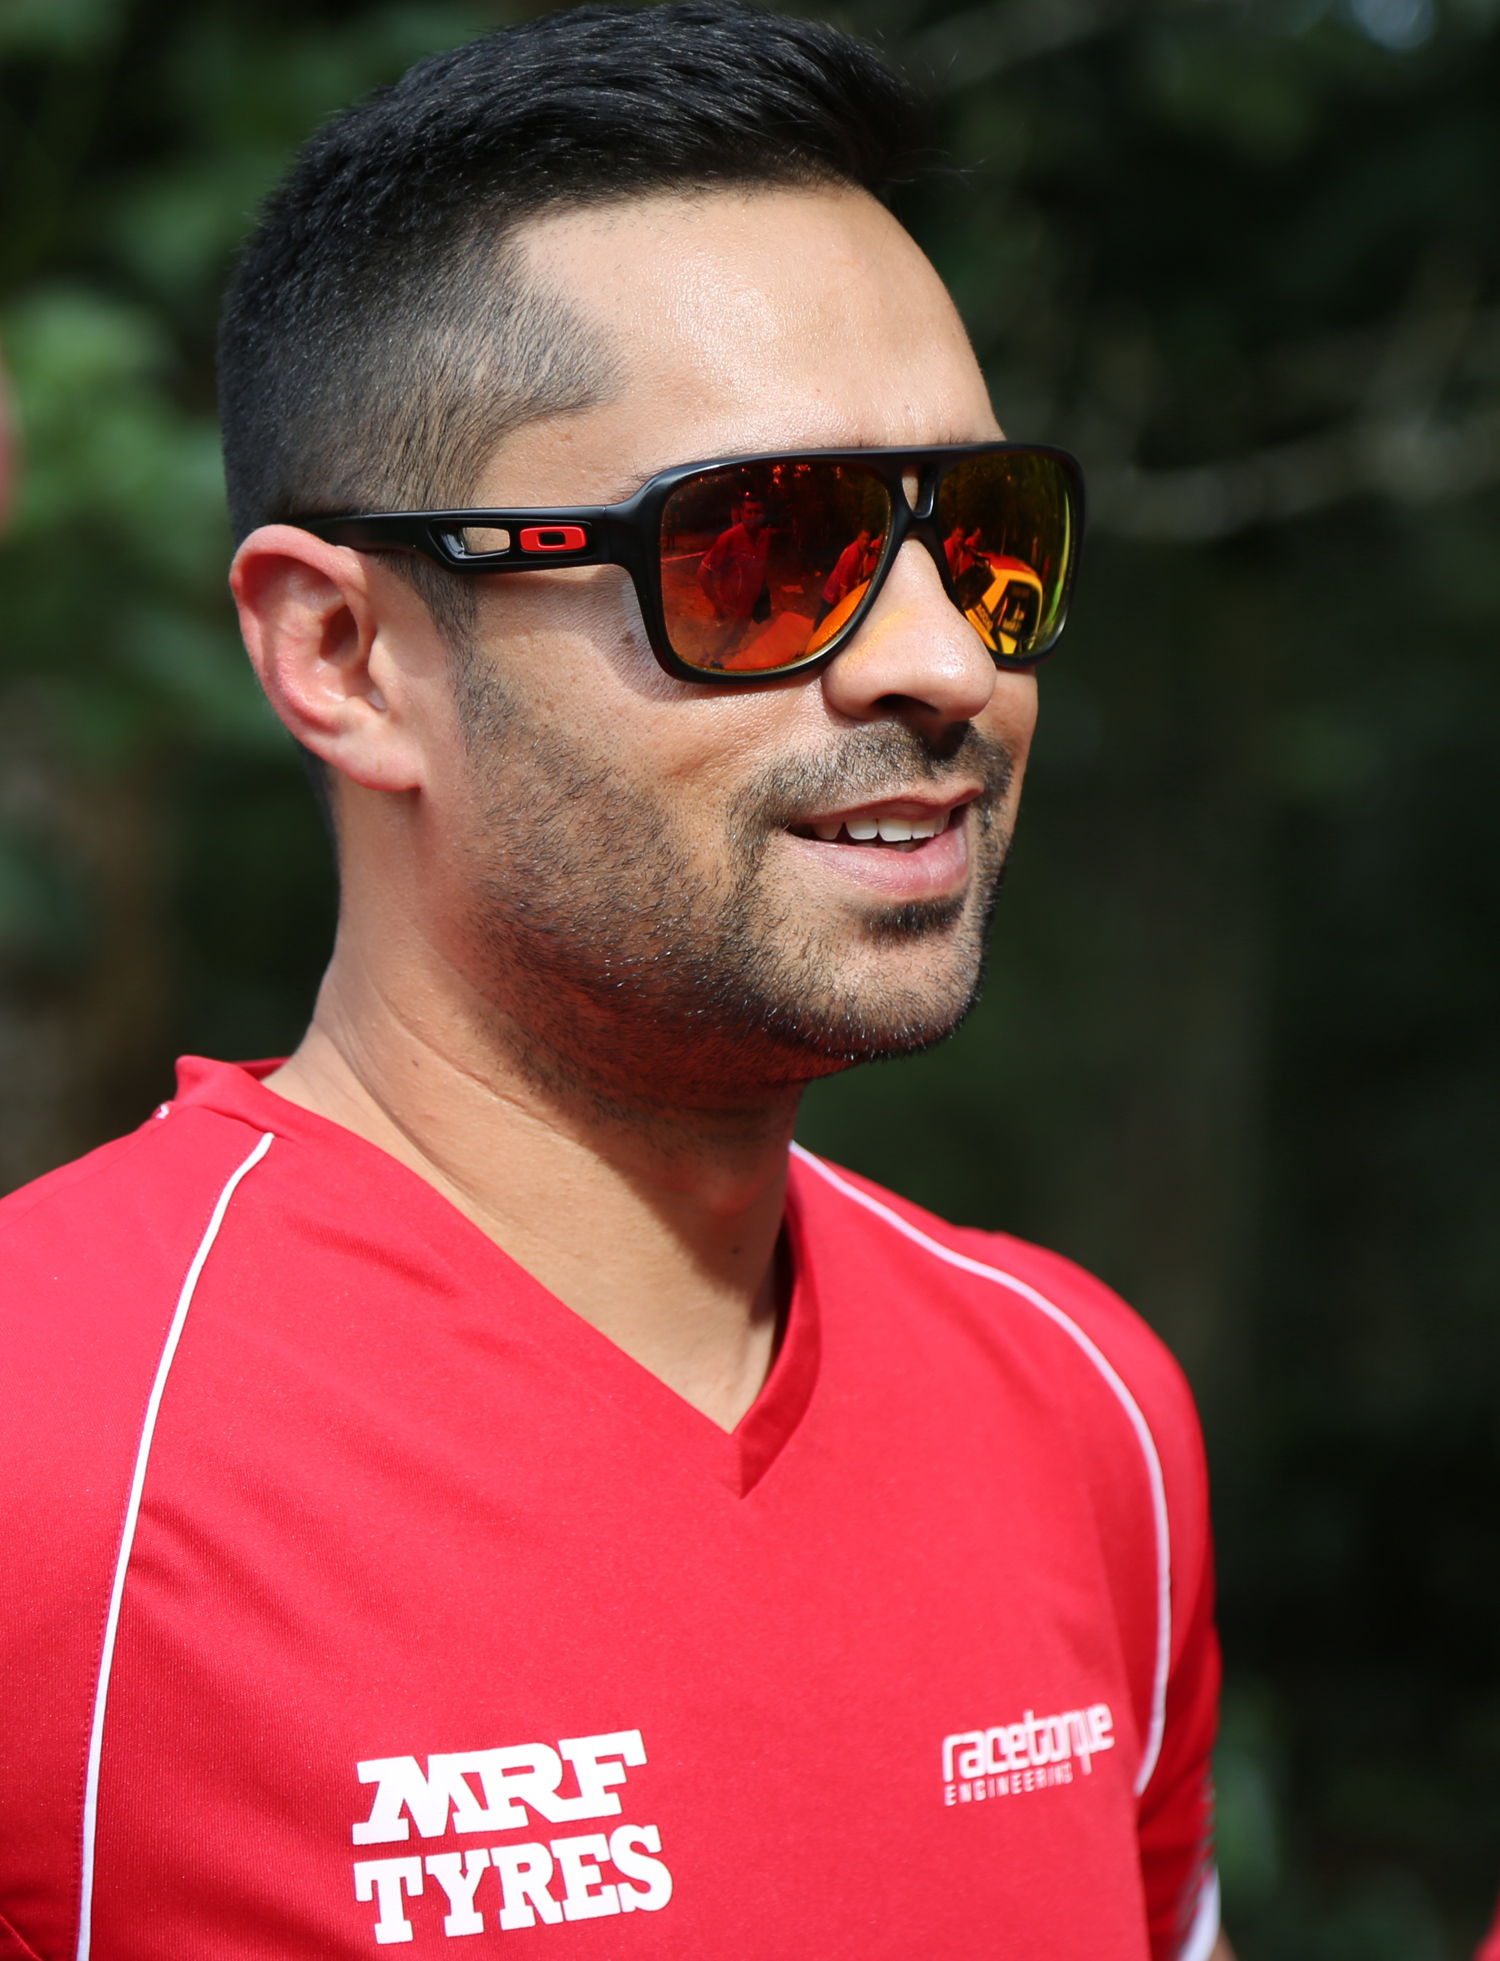 Gaurav Gill was crowned APRC champion for the second time, having previously won the title in 2013.